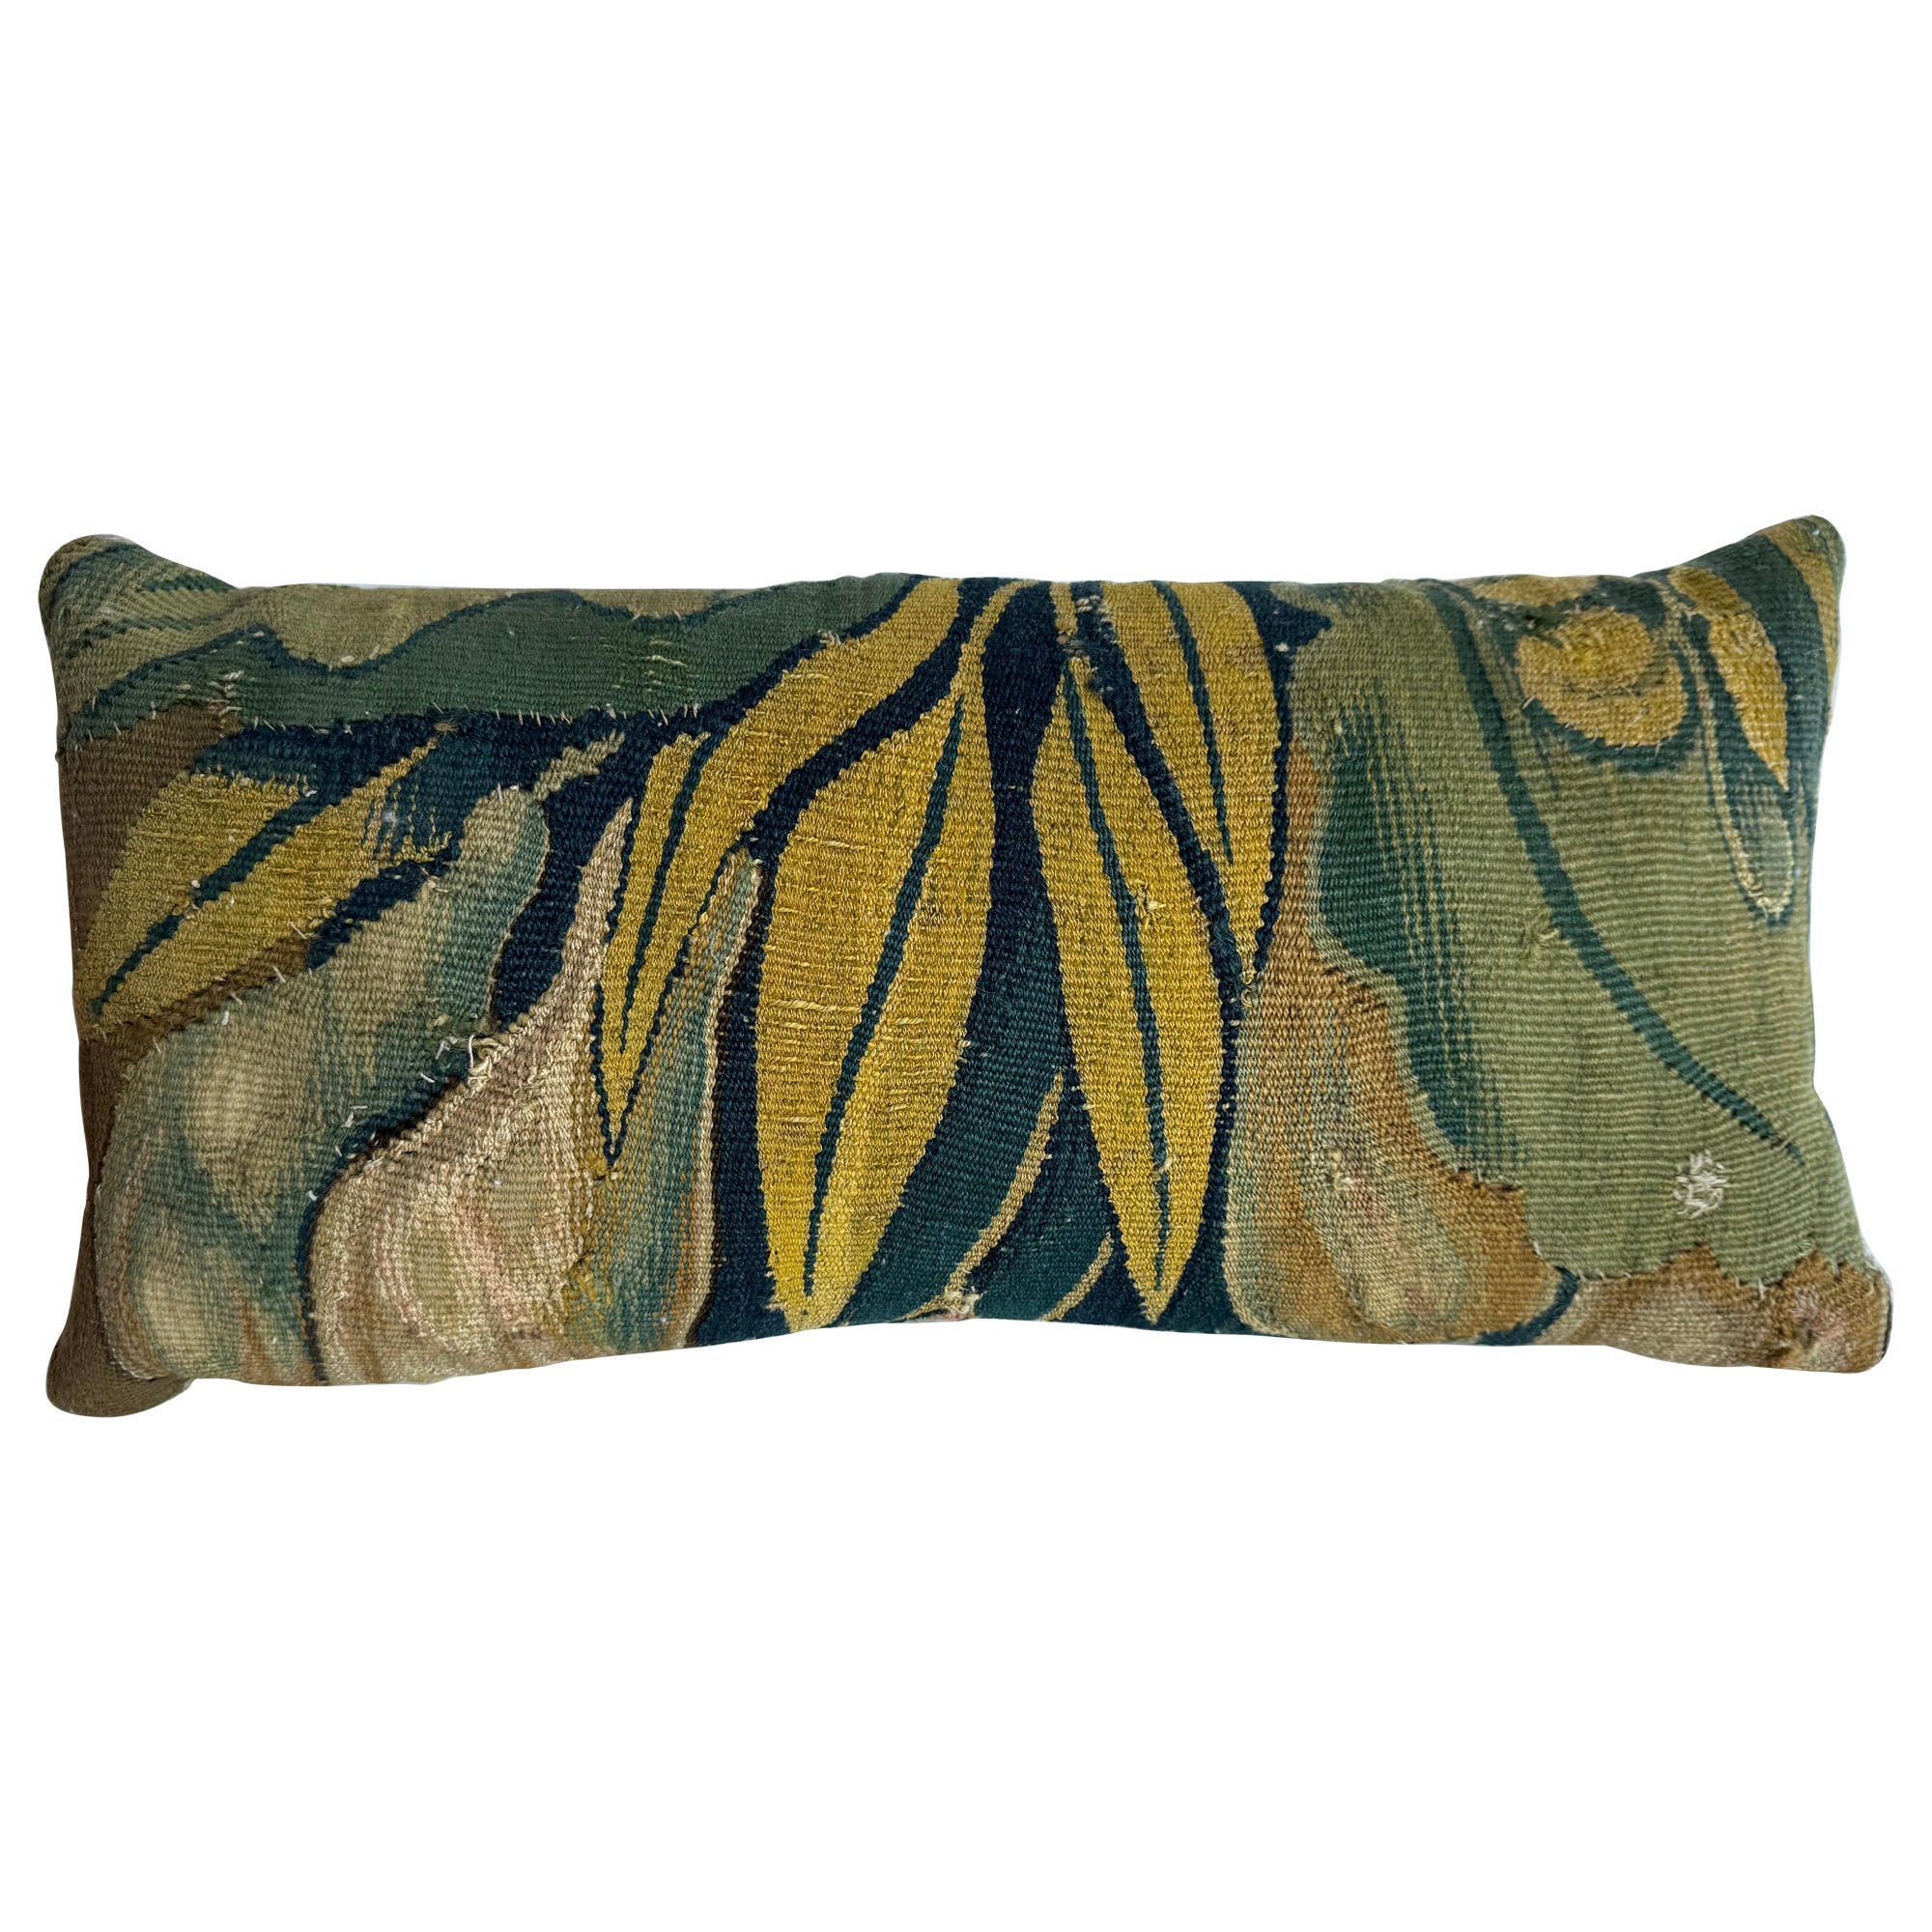  Brussels 16th Century Pillow - 18" X 9" For Sale